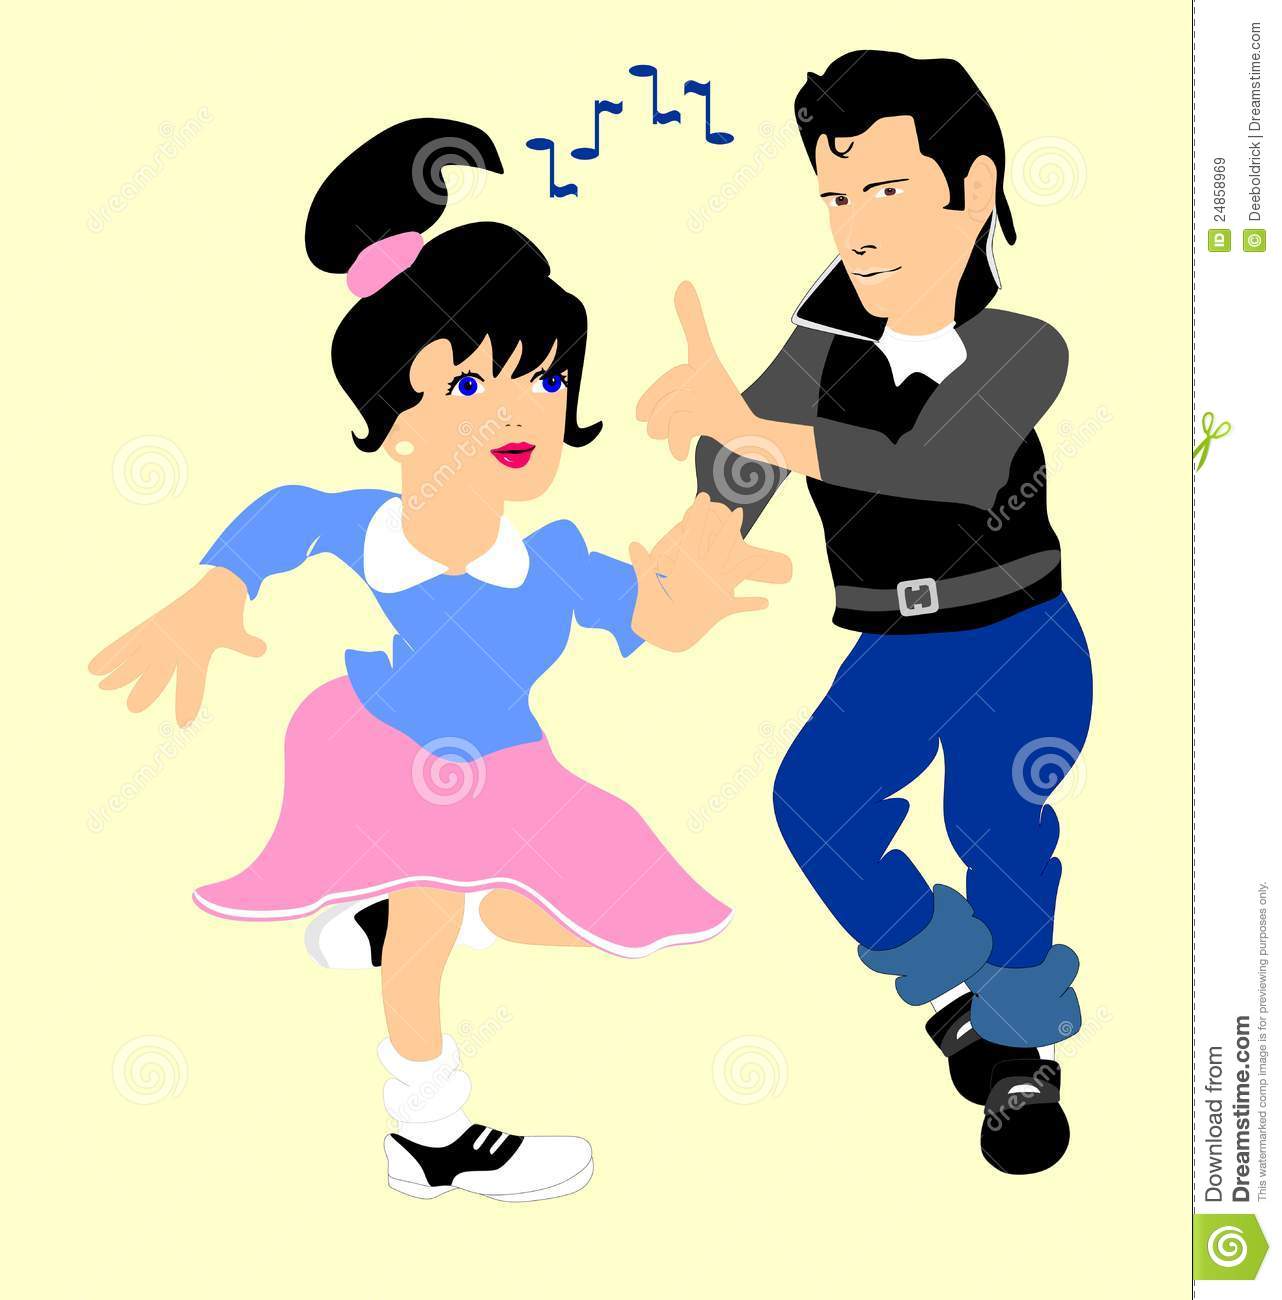 Dance To The 50 S Rock N  Roll   Royalty Free Stock Images   Image